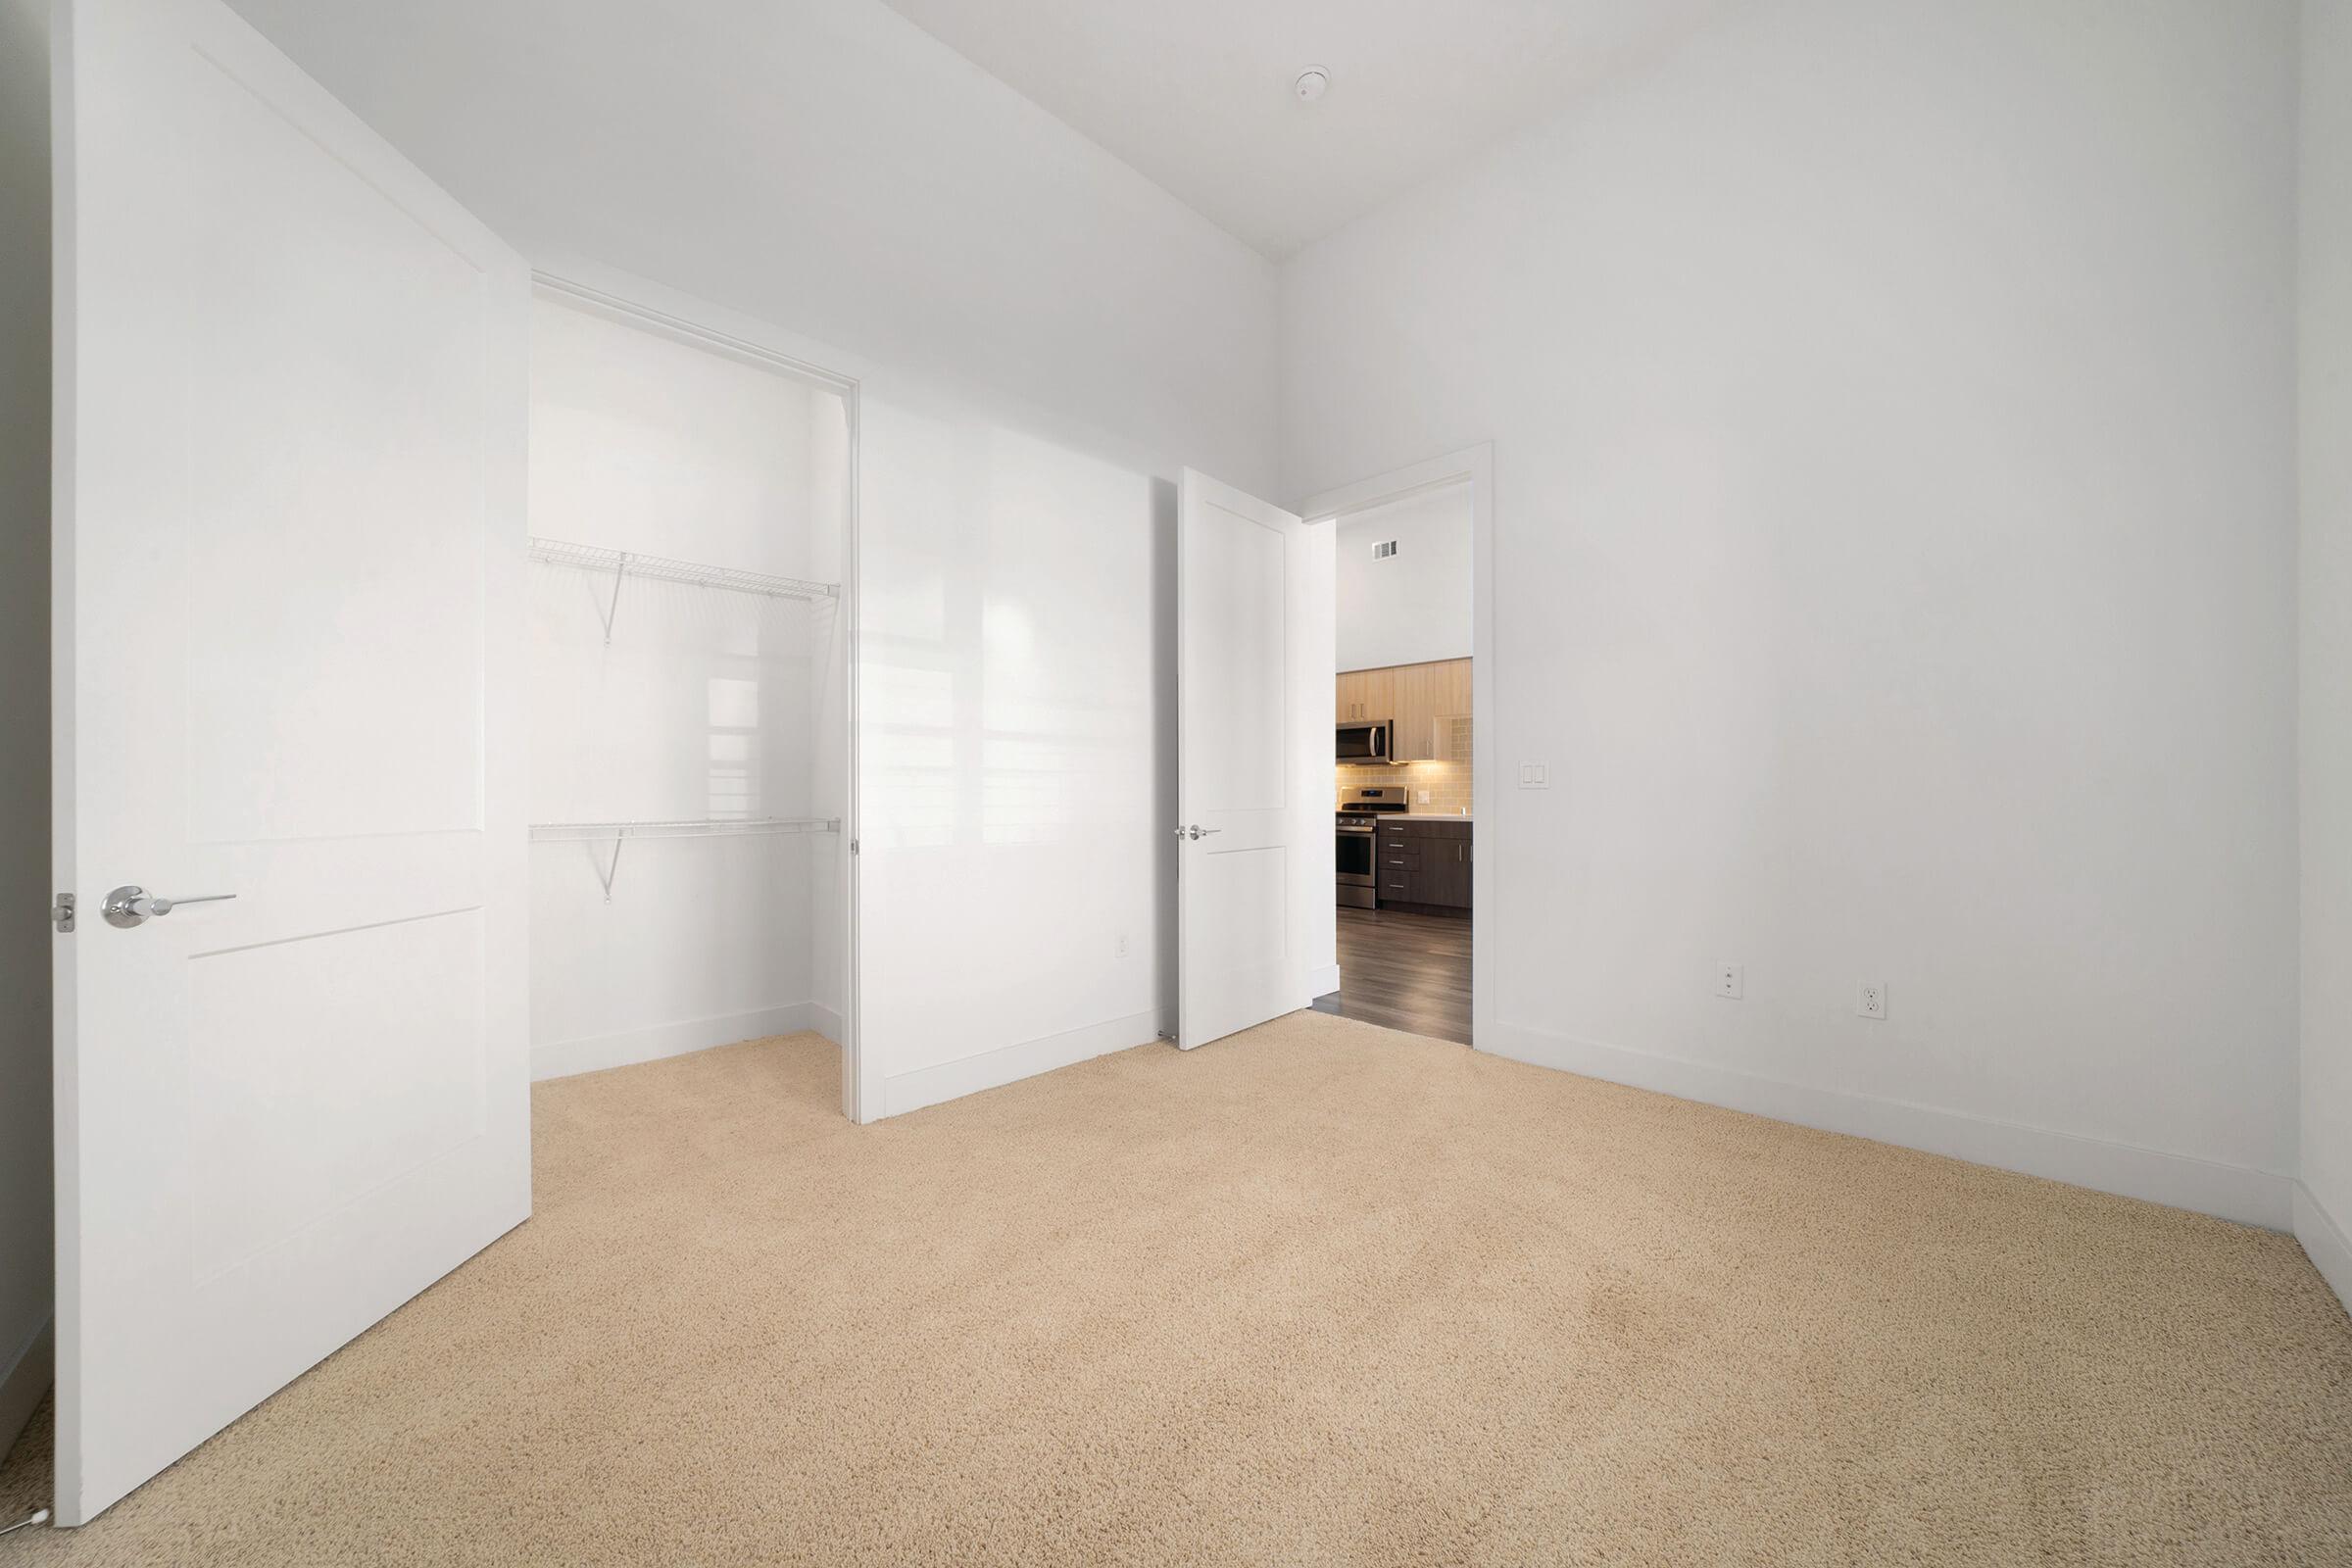 Unfurnished carpeted room with open closet